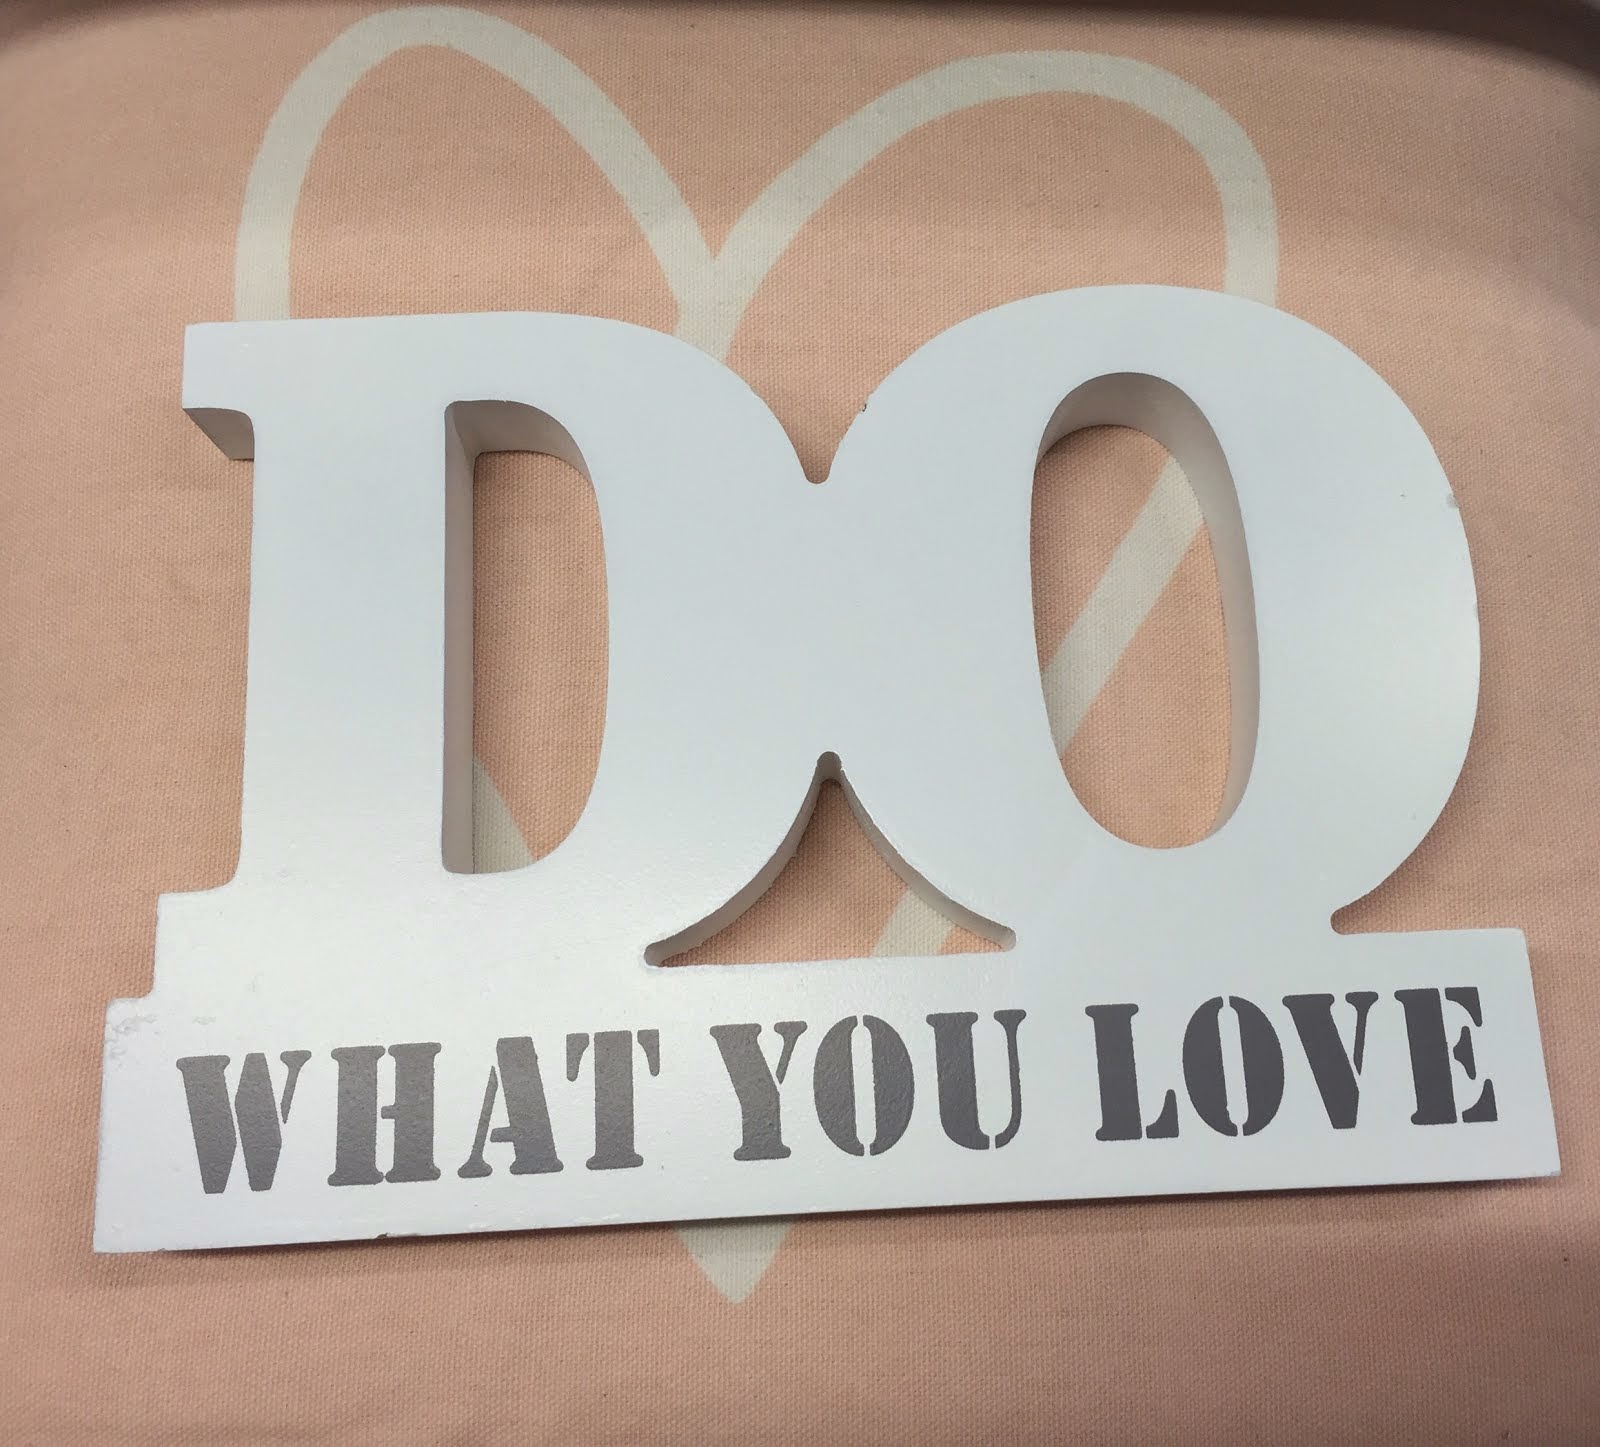 Do what you love!